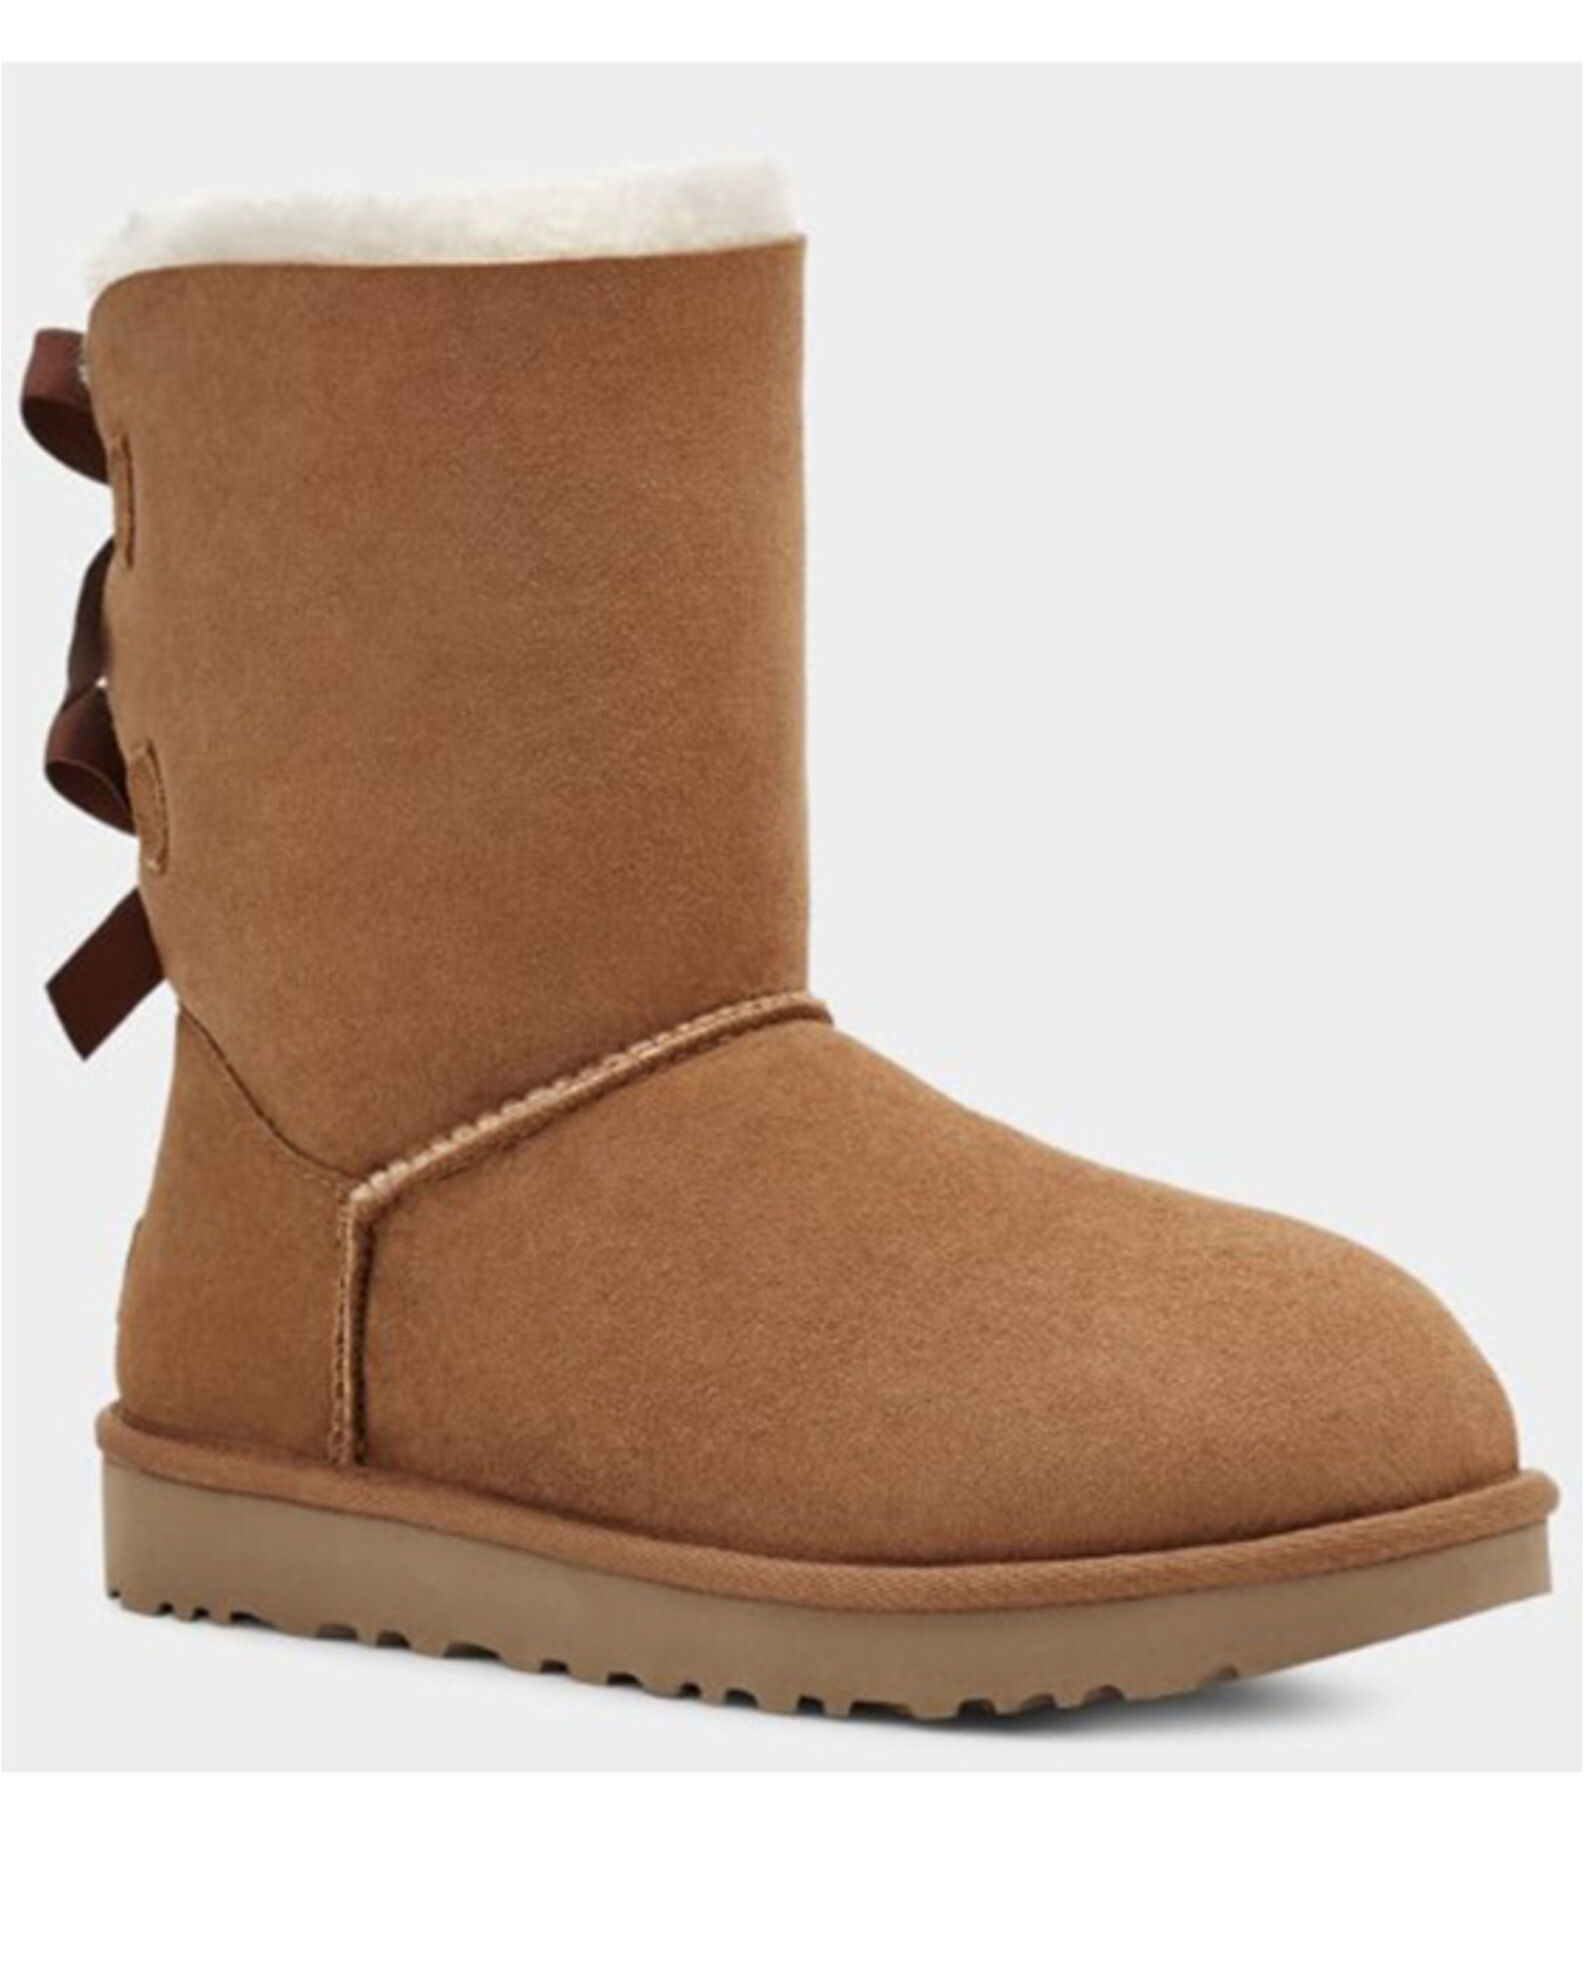 UGG Women's Bailey Bow II Boots - Round Toe